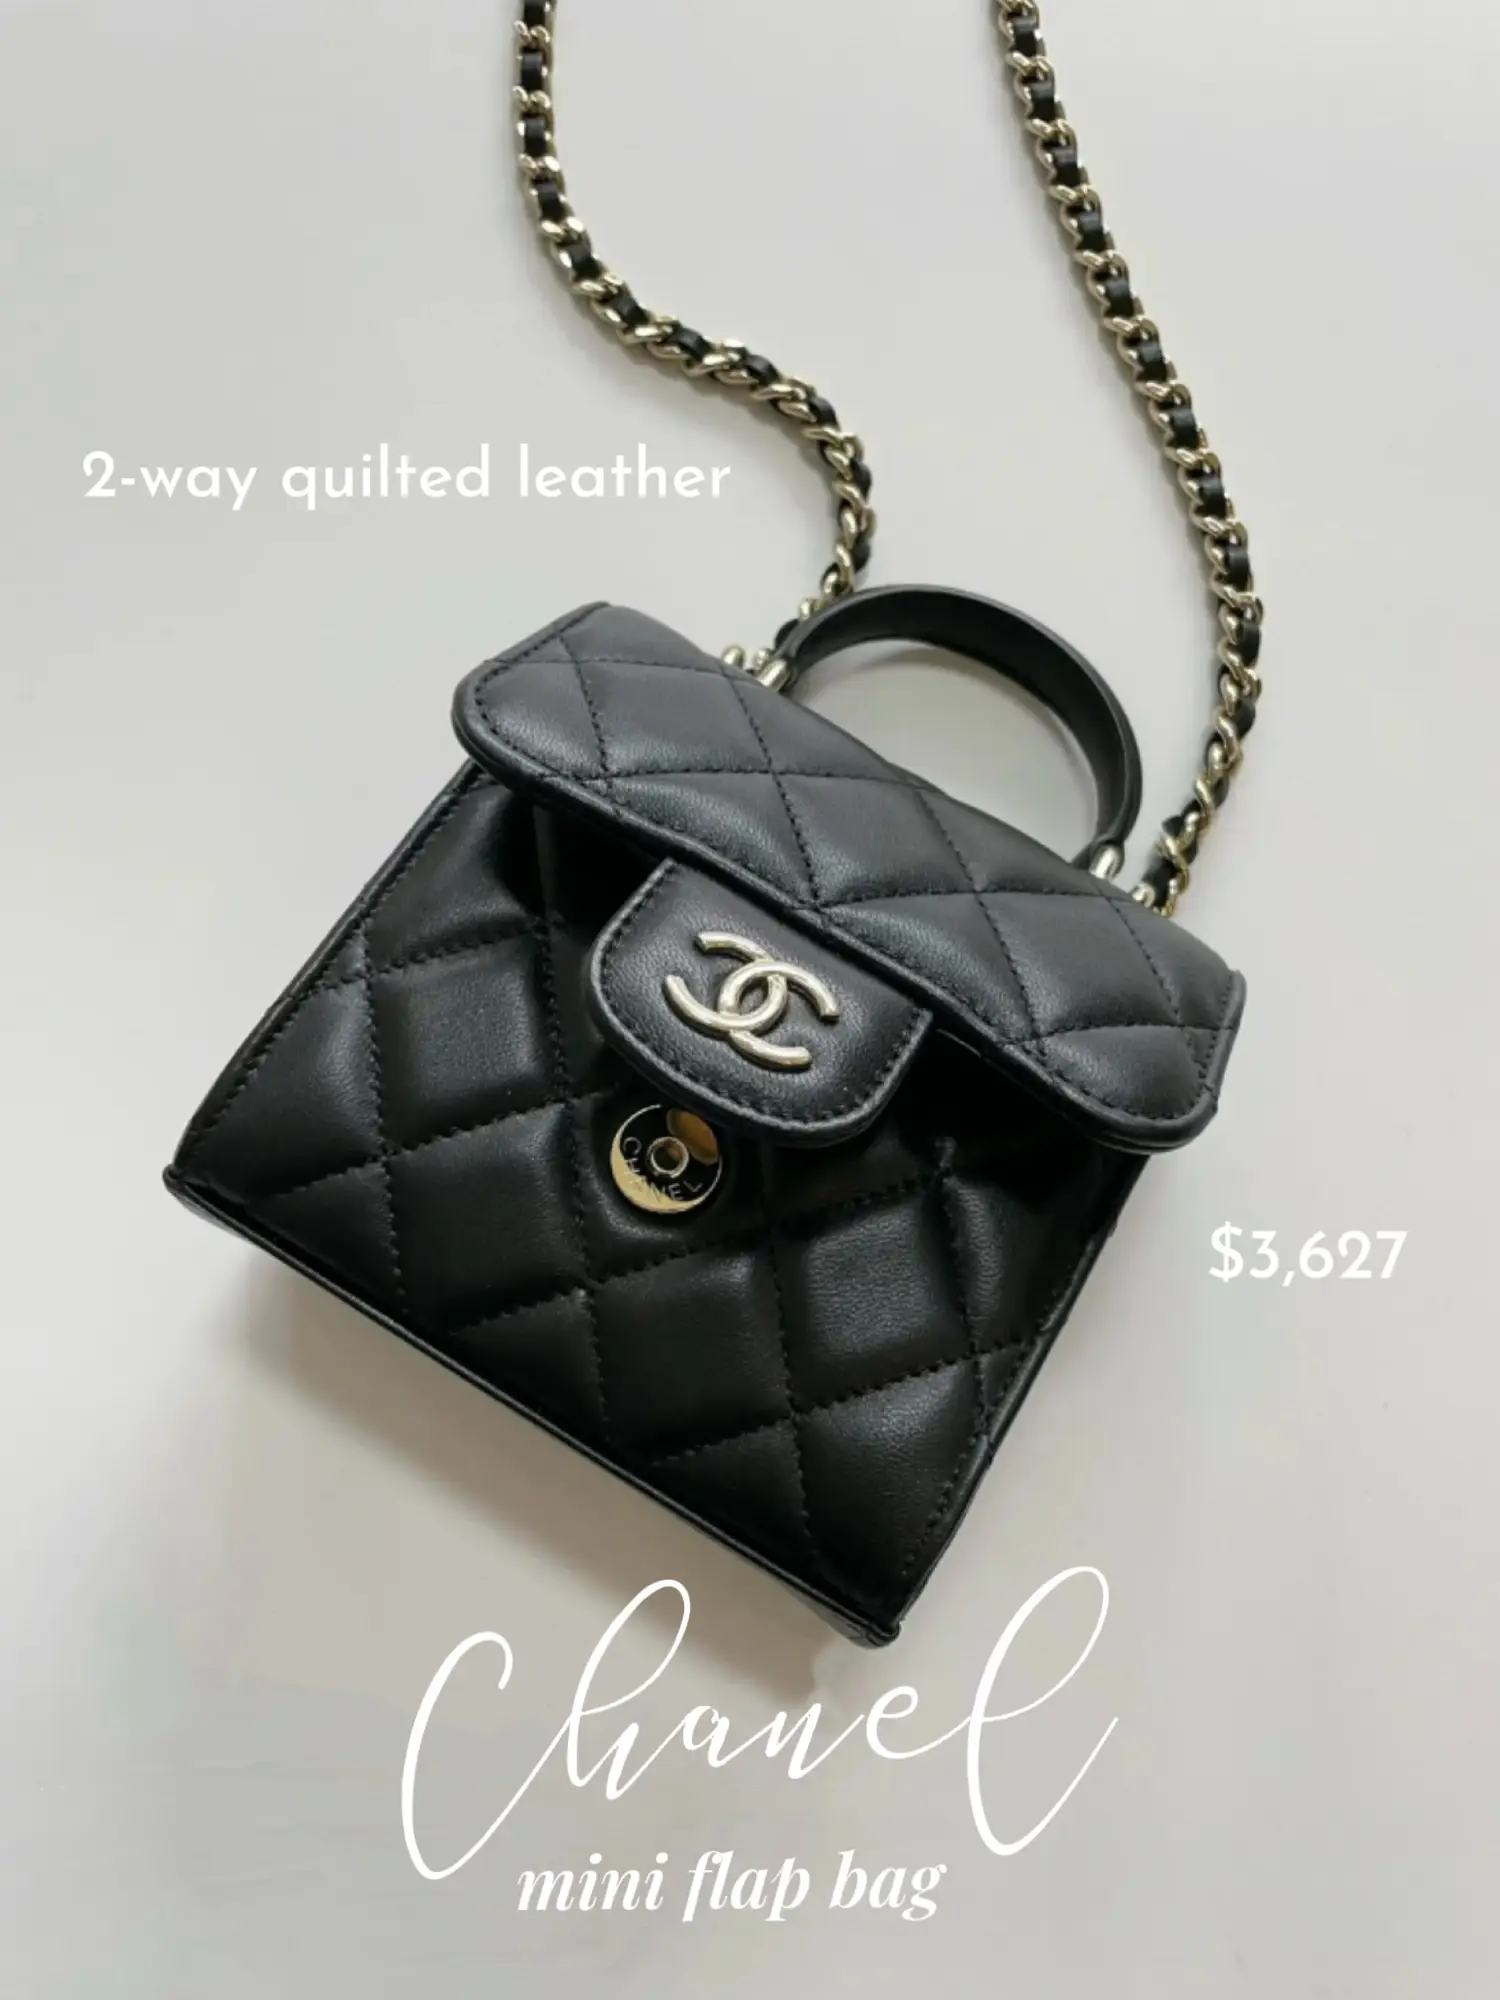 Top 4 black bags (Chanel Edition), Gallery posted by Hailey Collins